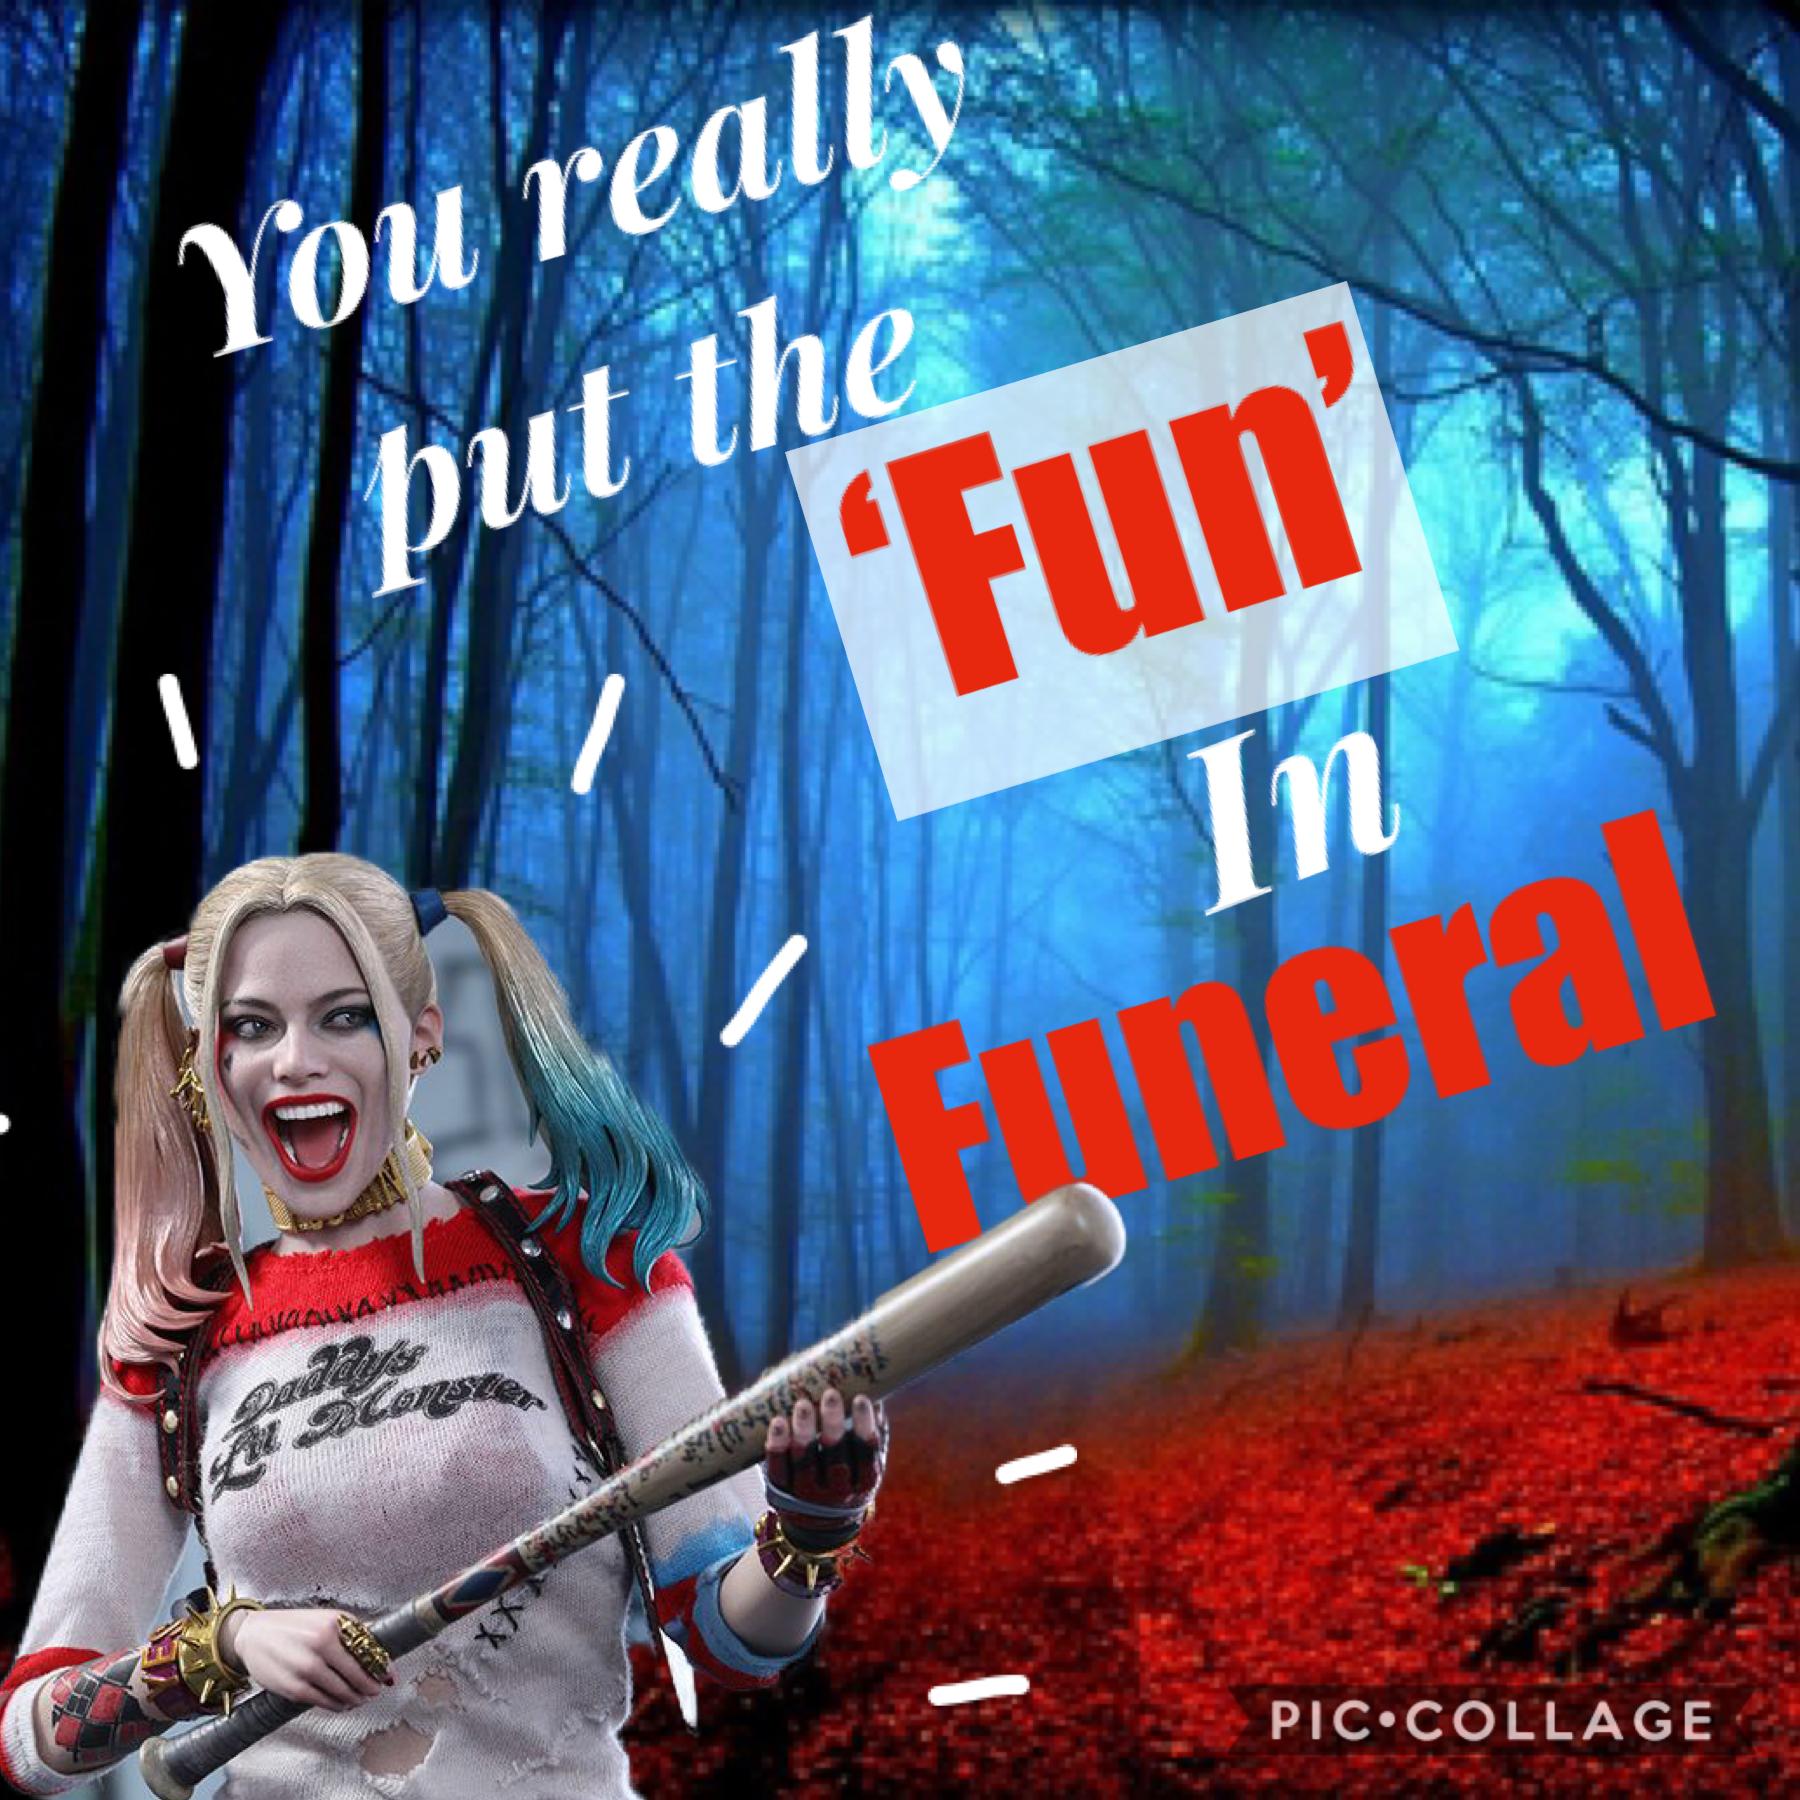 Who else thinks HARLEY QUINN IS QUEEN!!!! ❤️❤️